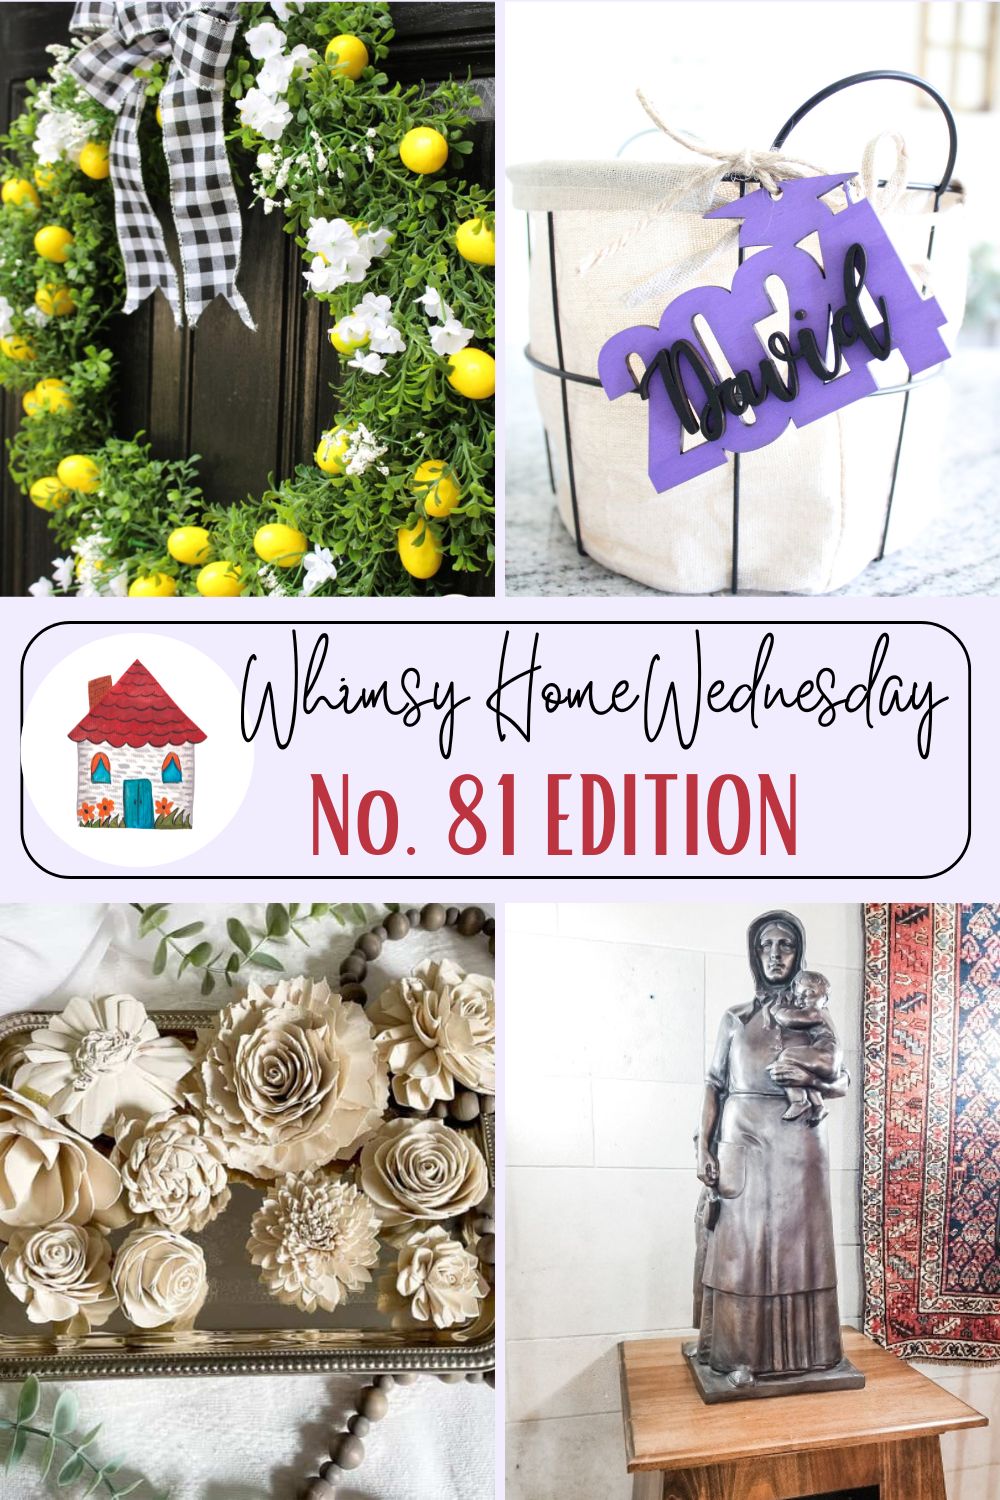 Whimsy Home Wednesday Blog Link Party No. 81